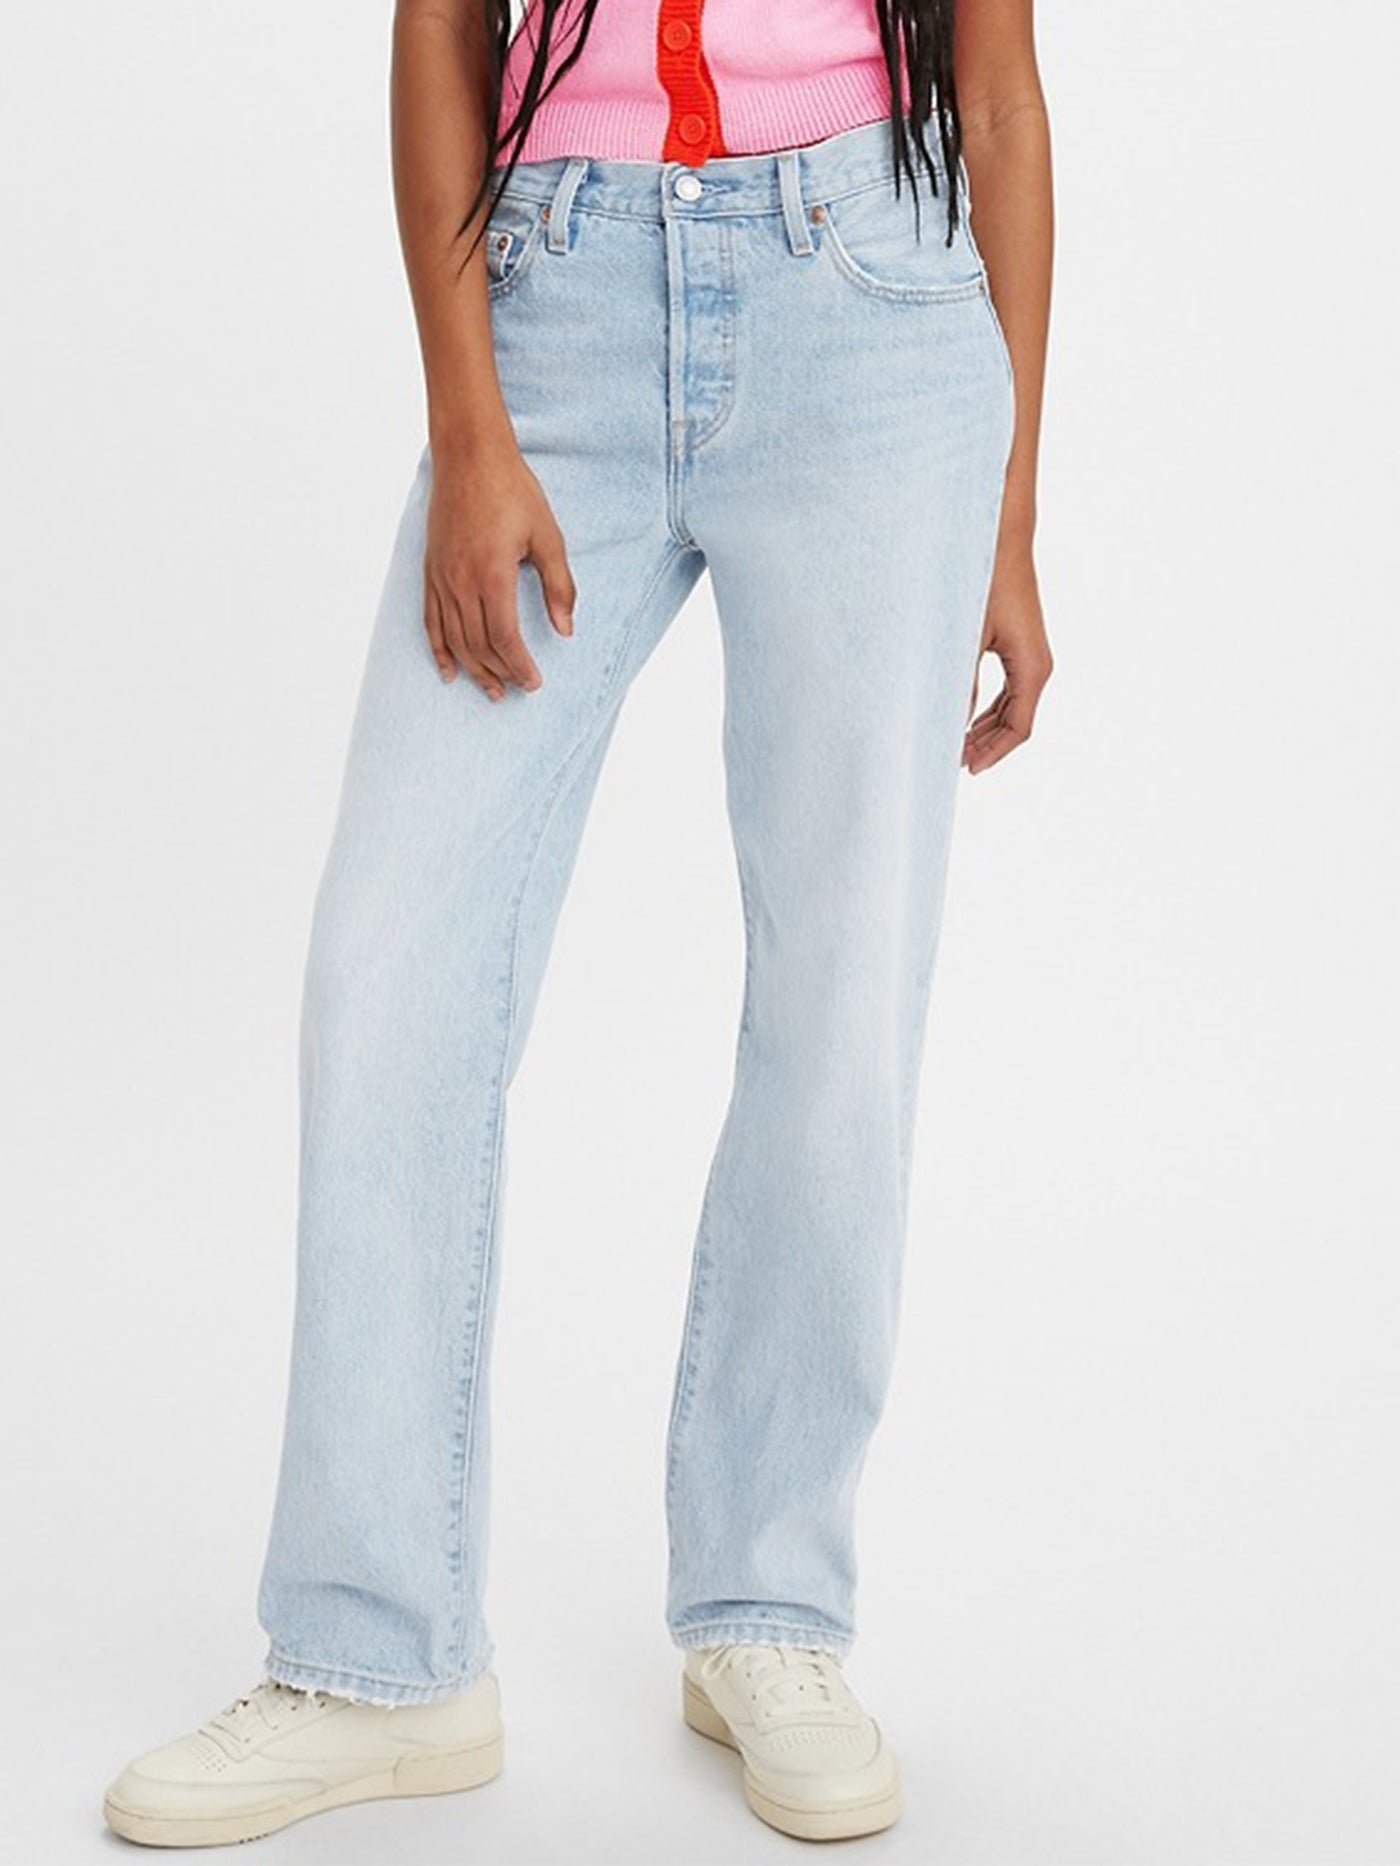 Levi's 501 90's Ever Afternoon Jeans